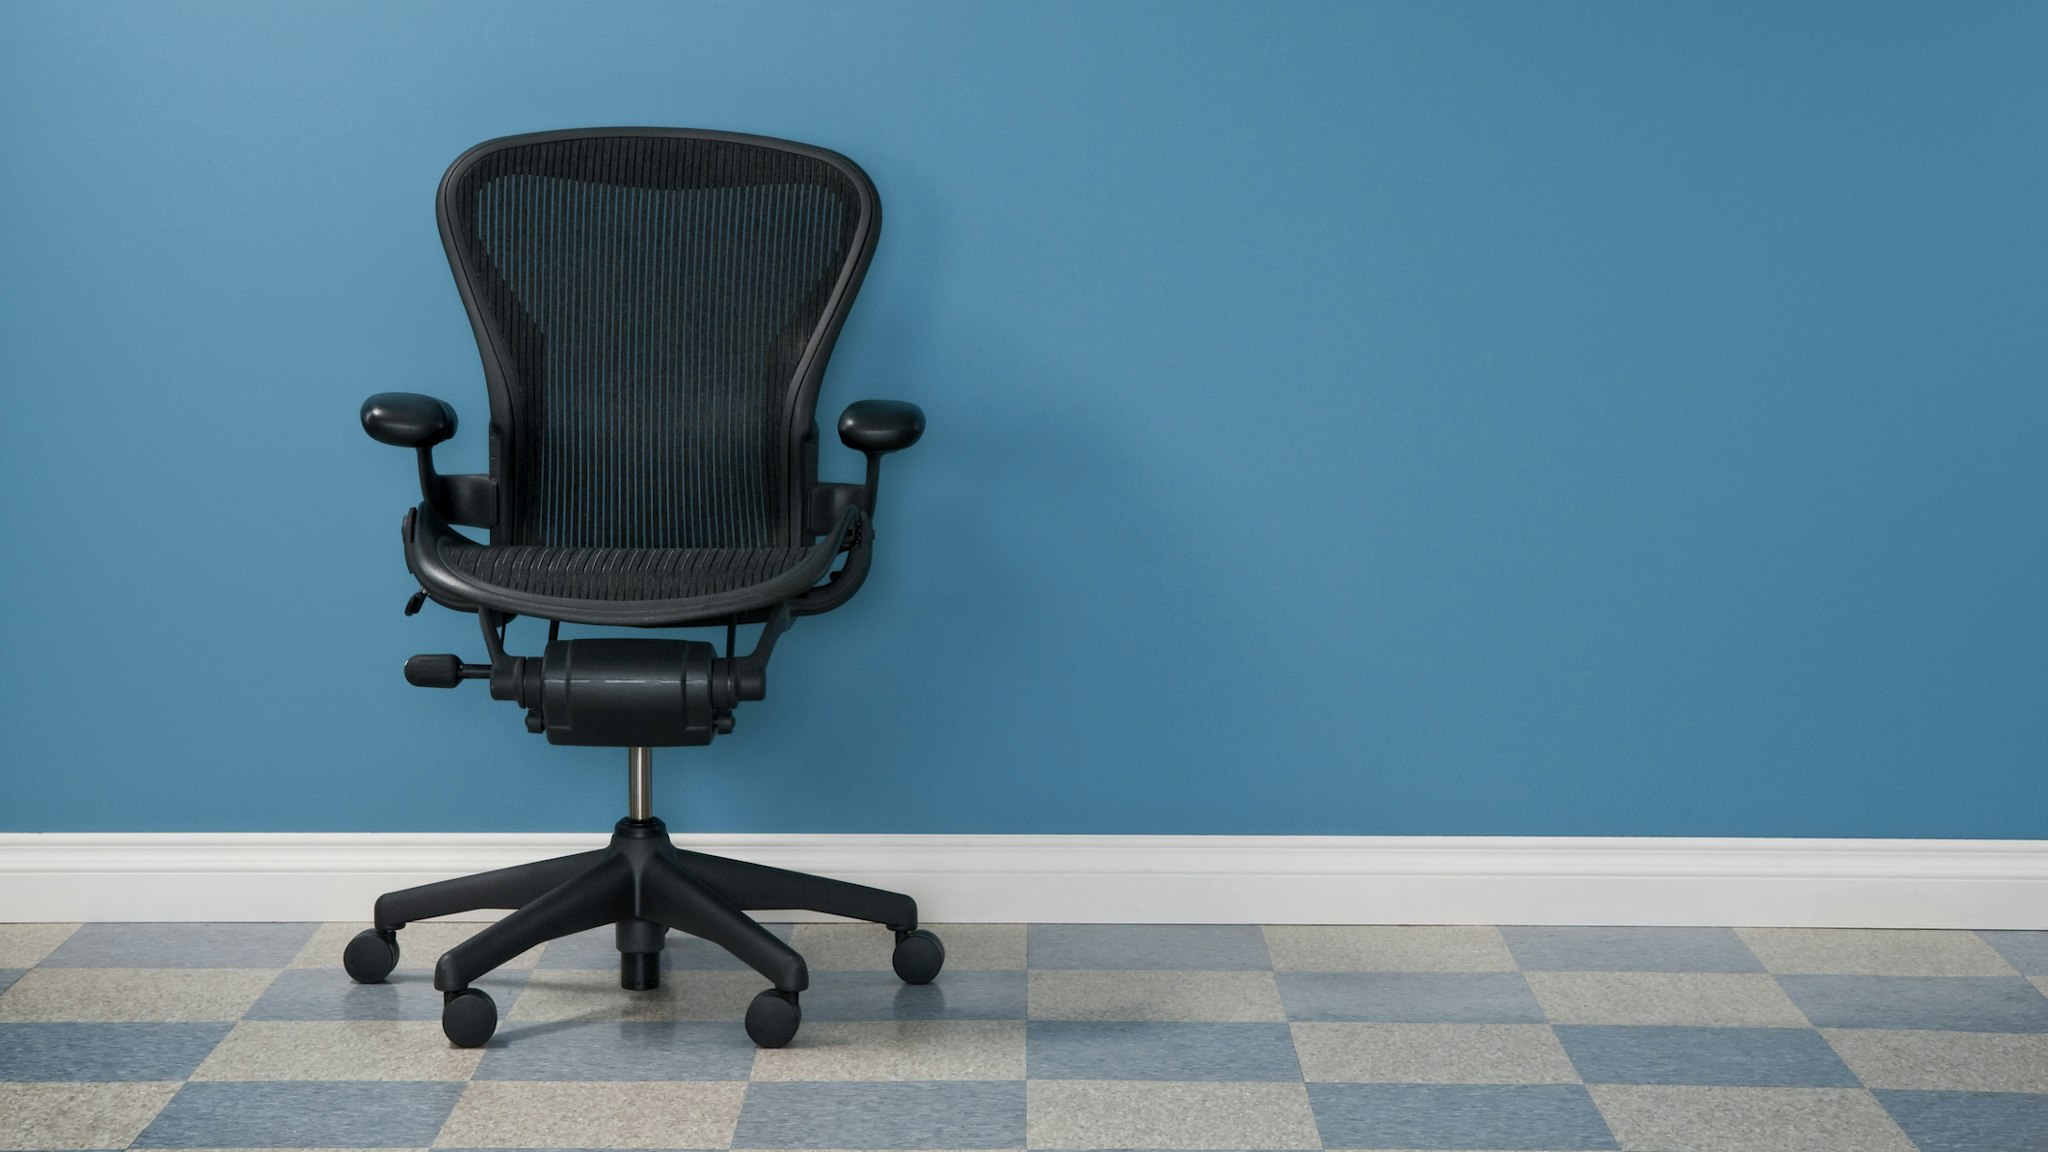 Single office chair in austere office.